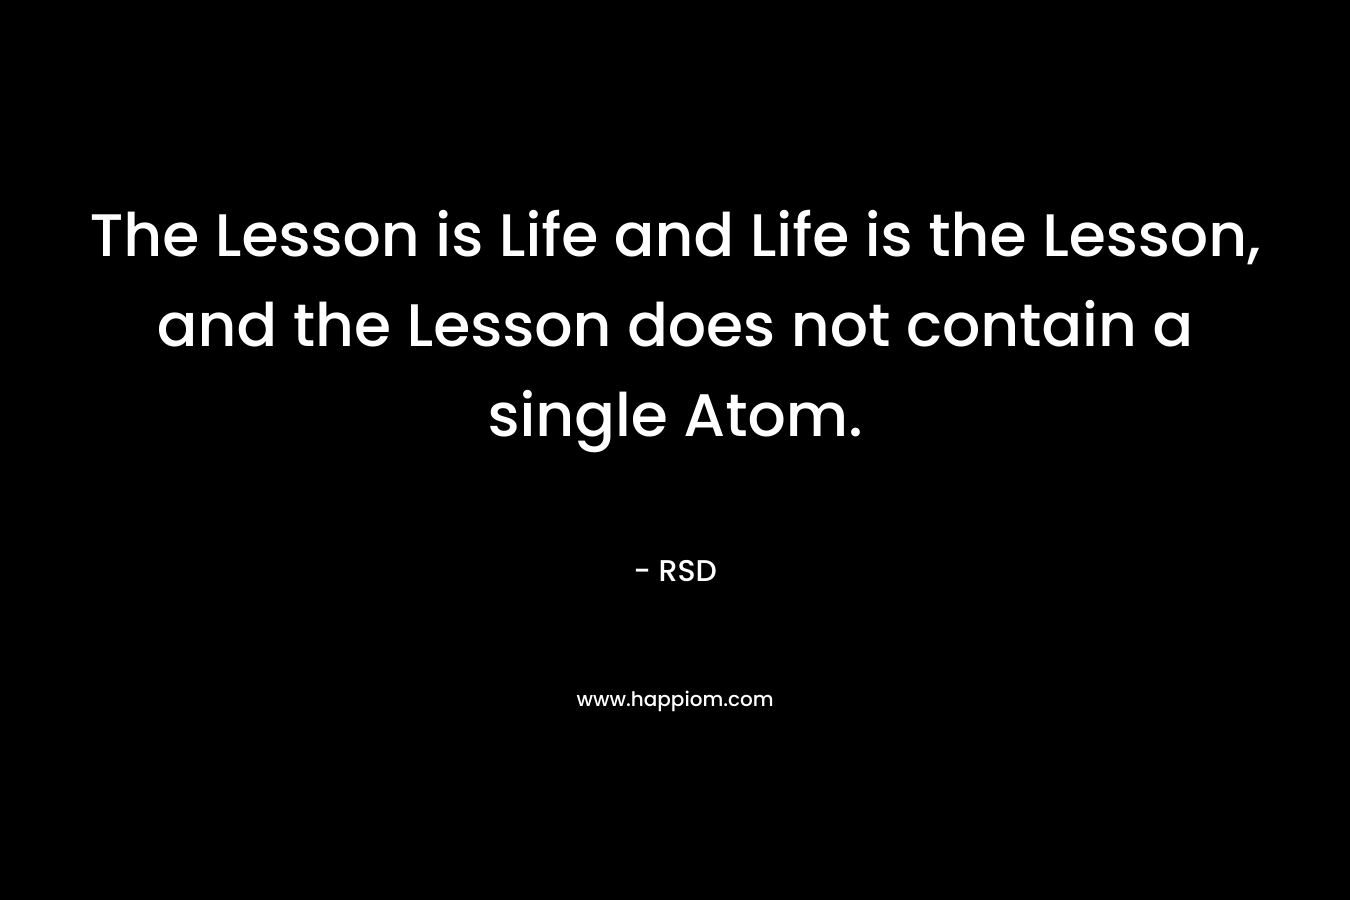 The Lesson is Life and Life is the Lesson, and the Lesson does not contain a single Atom. – RSD